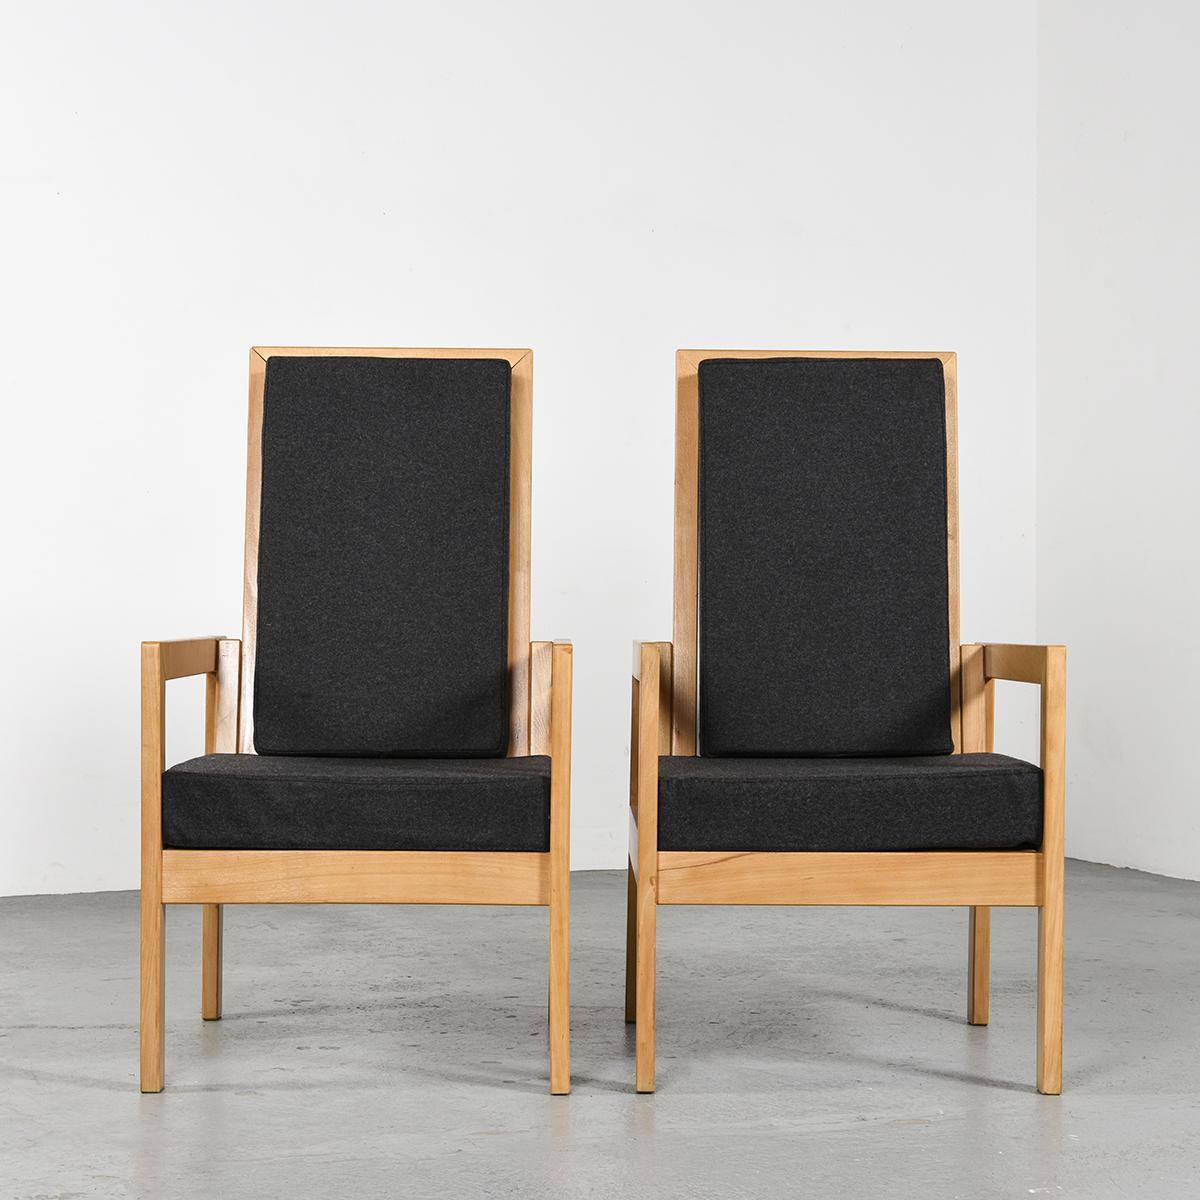 A pair of armchairs by André Sornay, designed in the 1960s.

Typical of the 